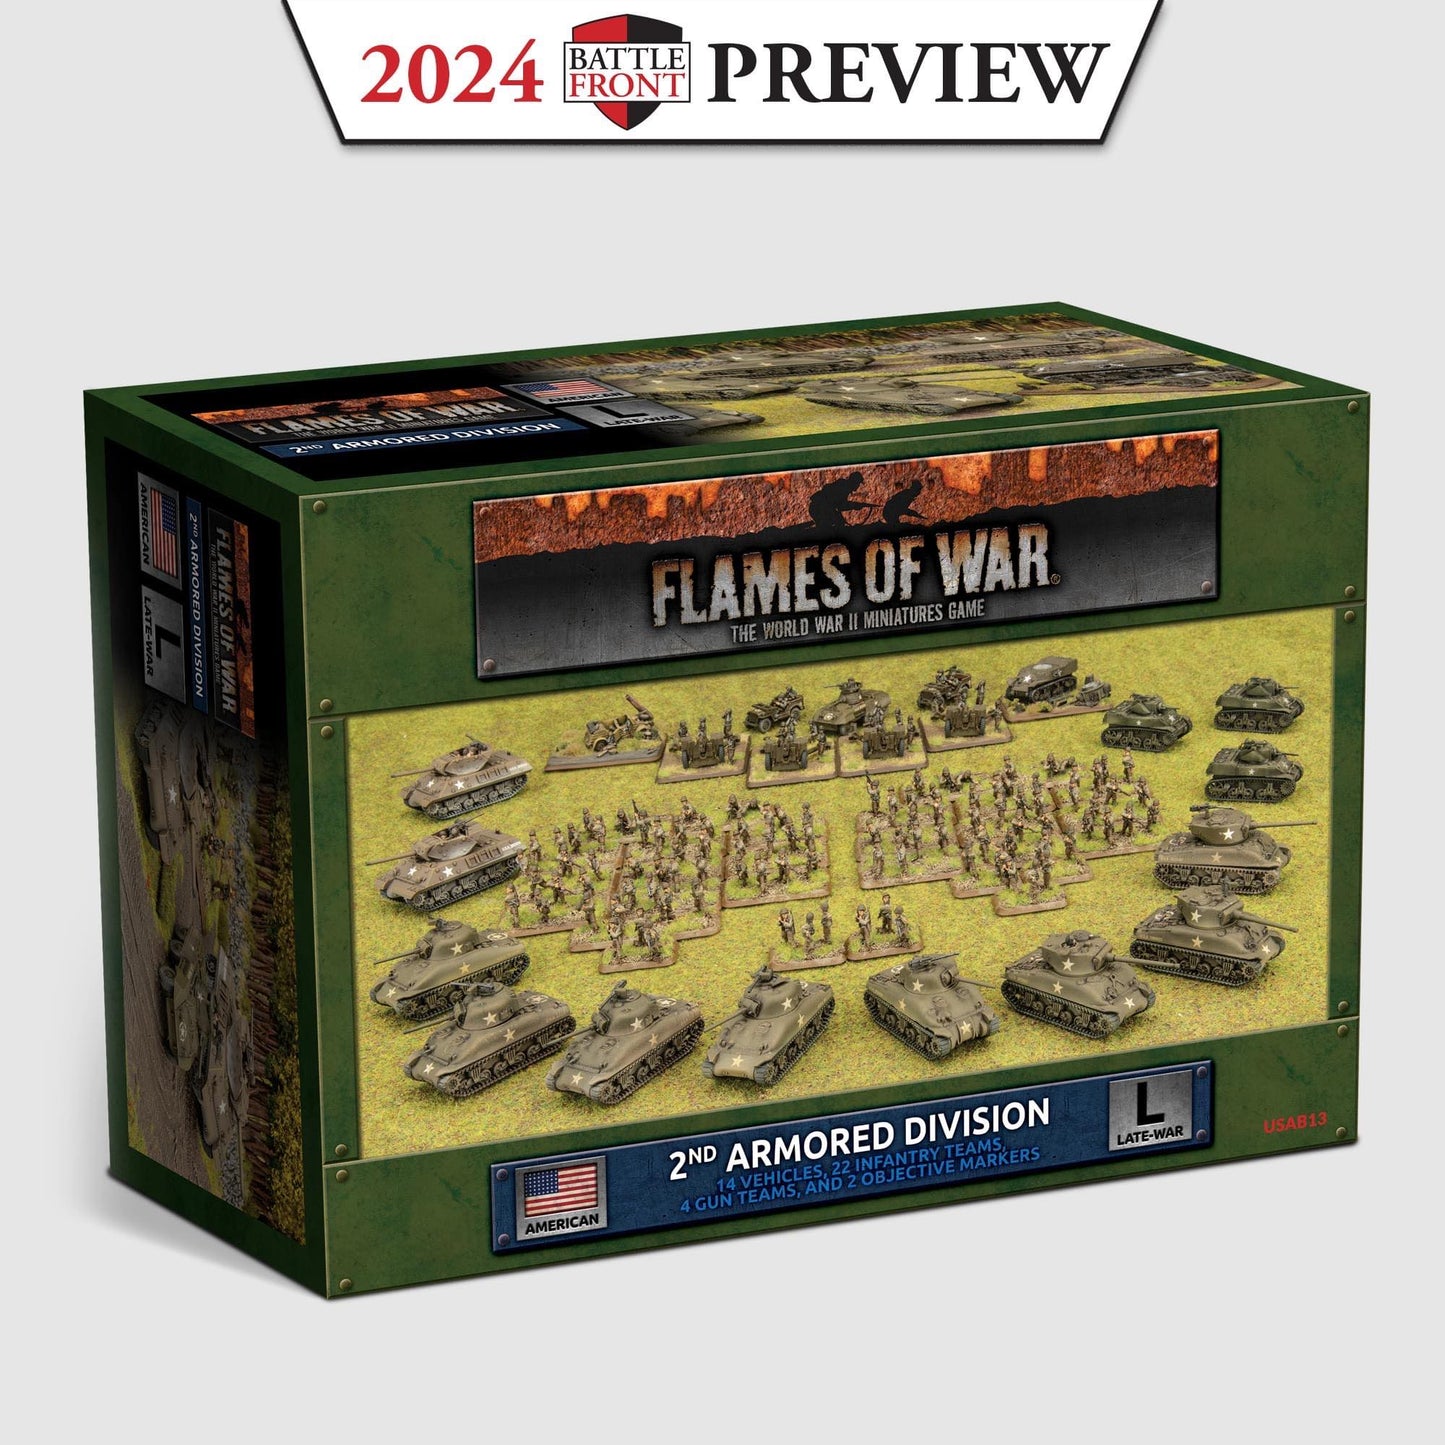 Preorder - 2nd Armored Division Army Box